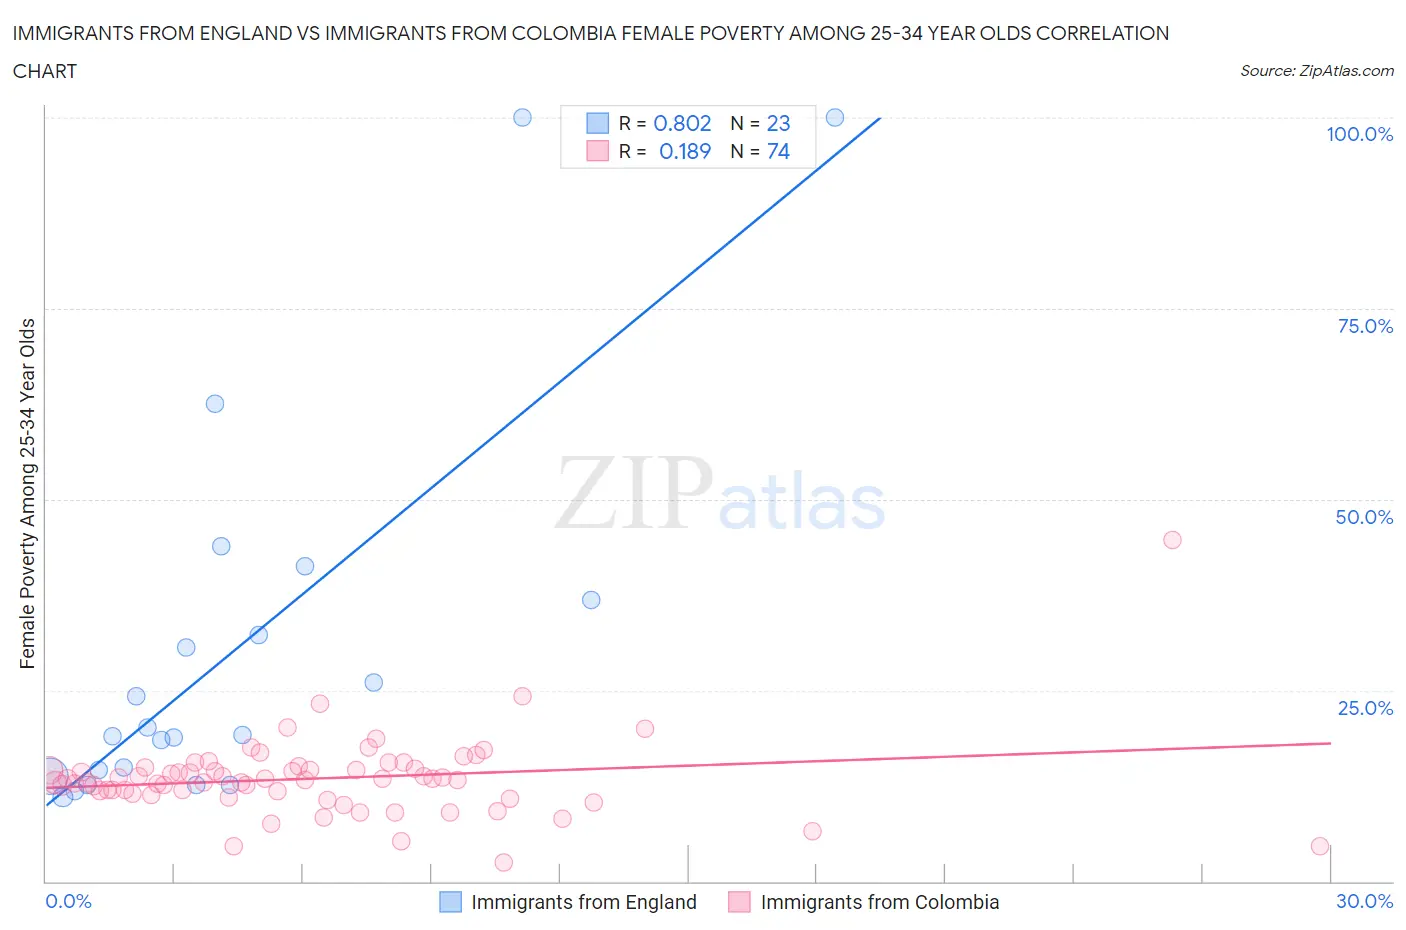 Immigrants from England vs Immigrants from Colombia Female Poverty Among 25-34 Year Olds